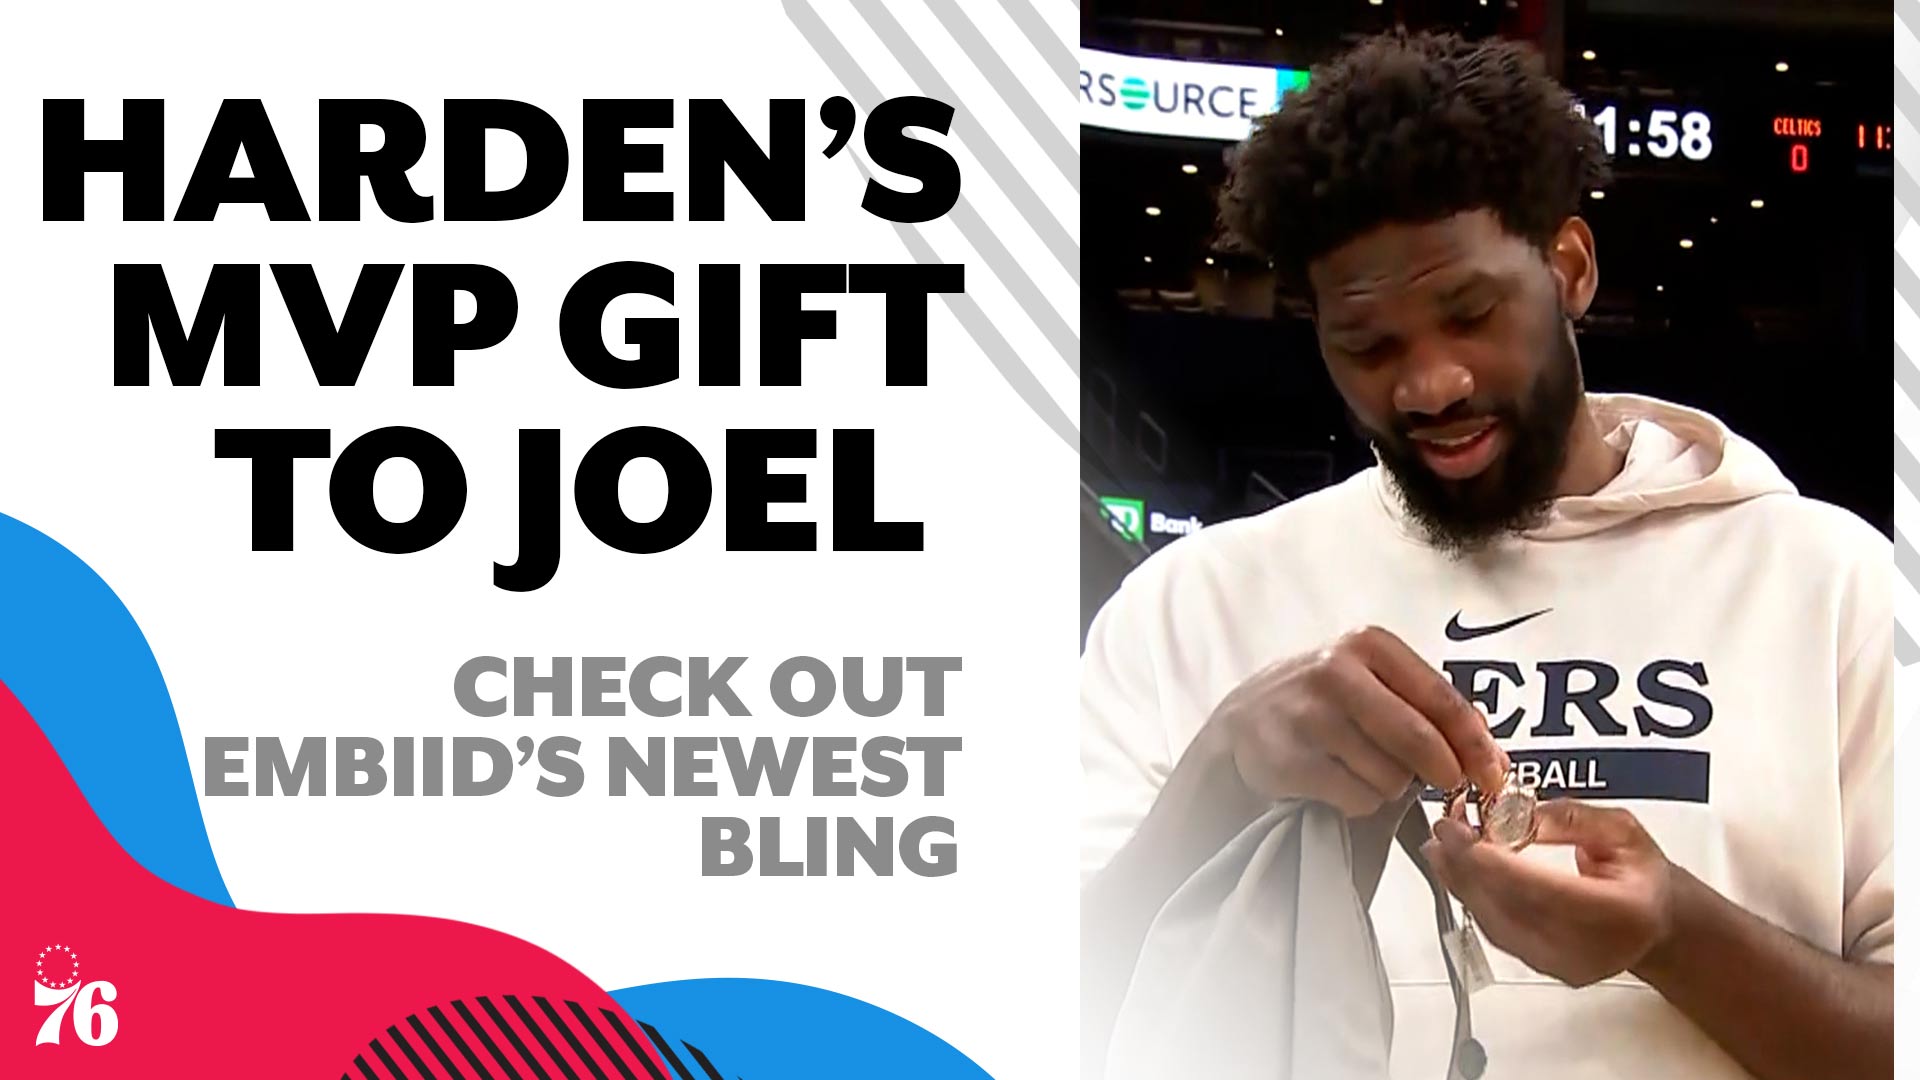 NBA MVP Joel Embiid's First Rolex Was a Gift From James Harden